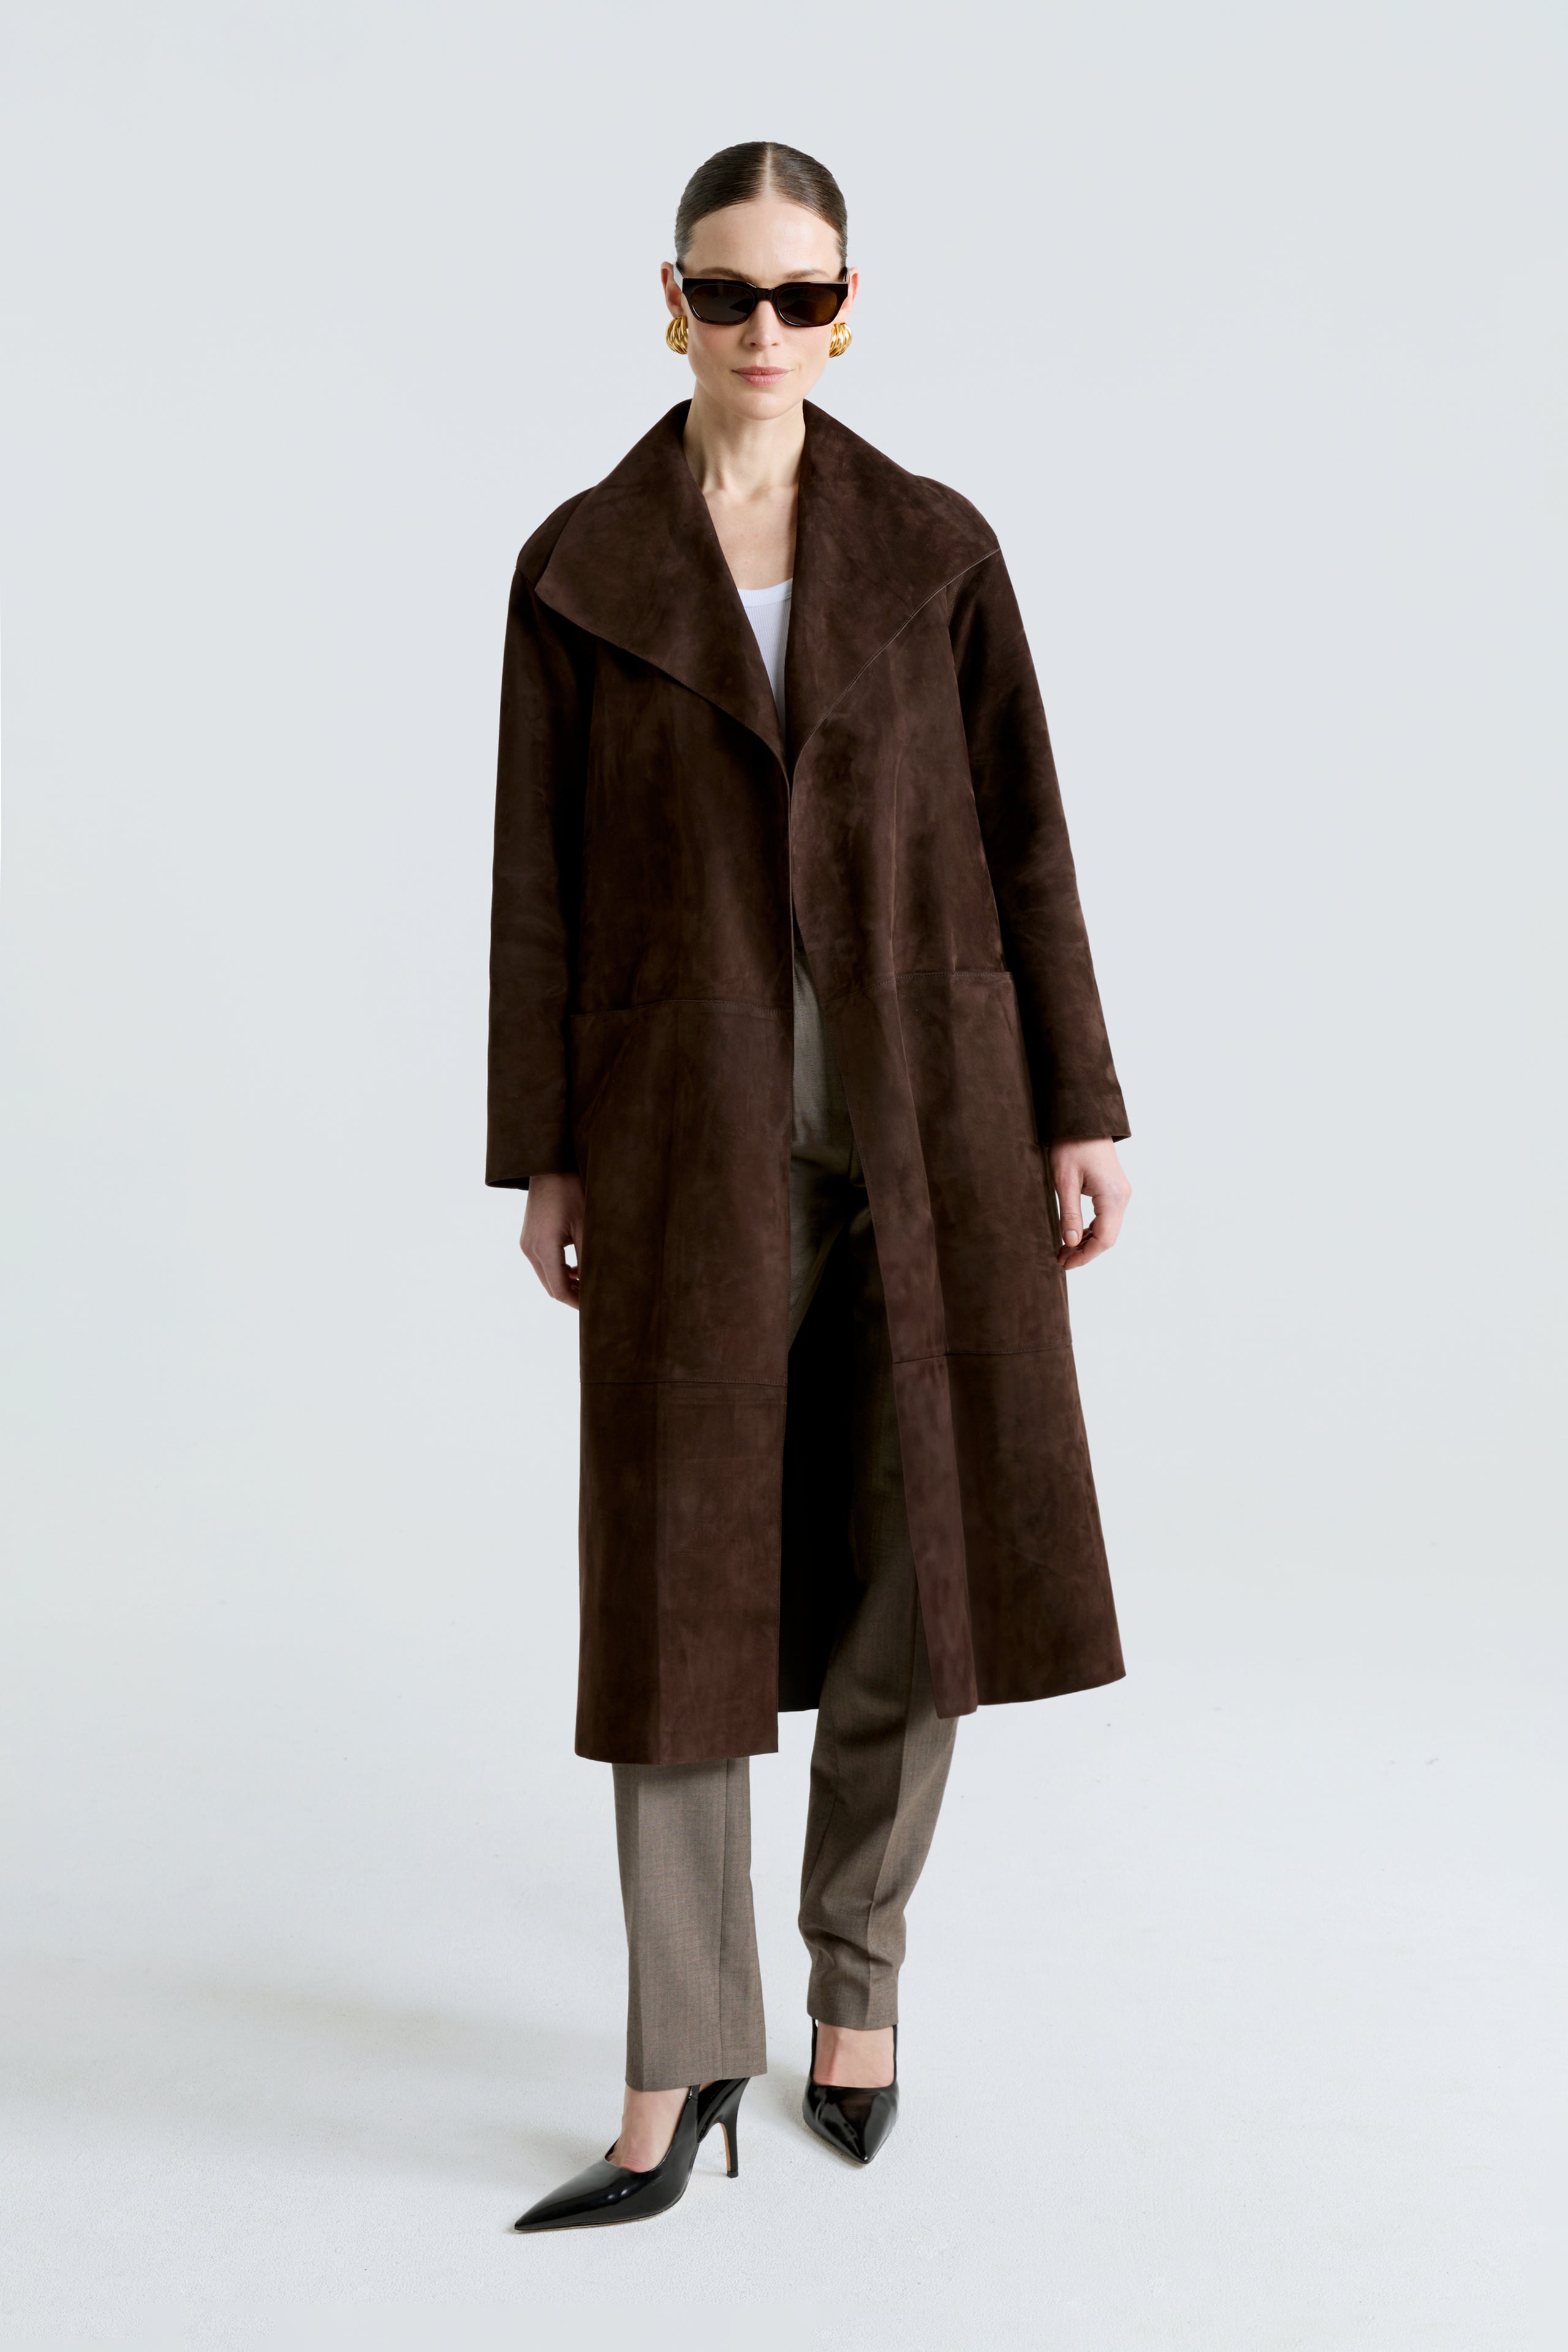 Model is wearing the Birthday Coat Suede Mocha Draped Suede Coat Front